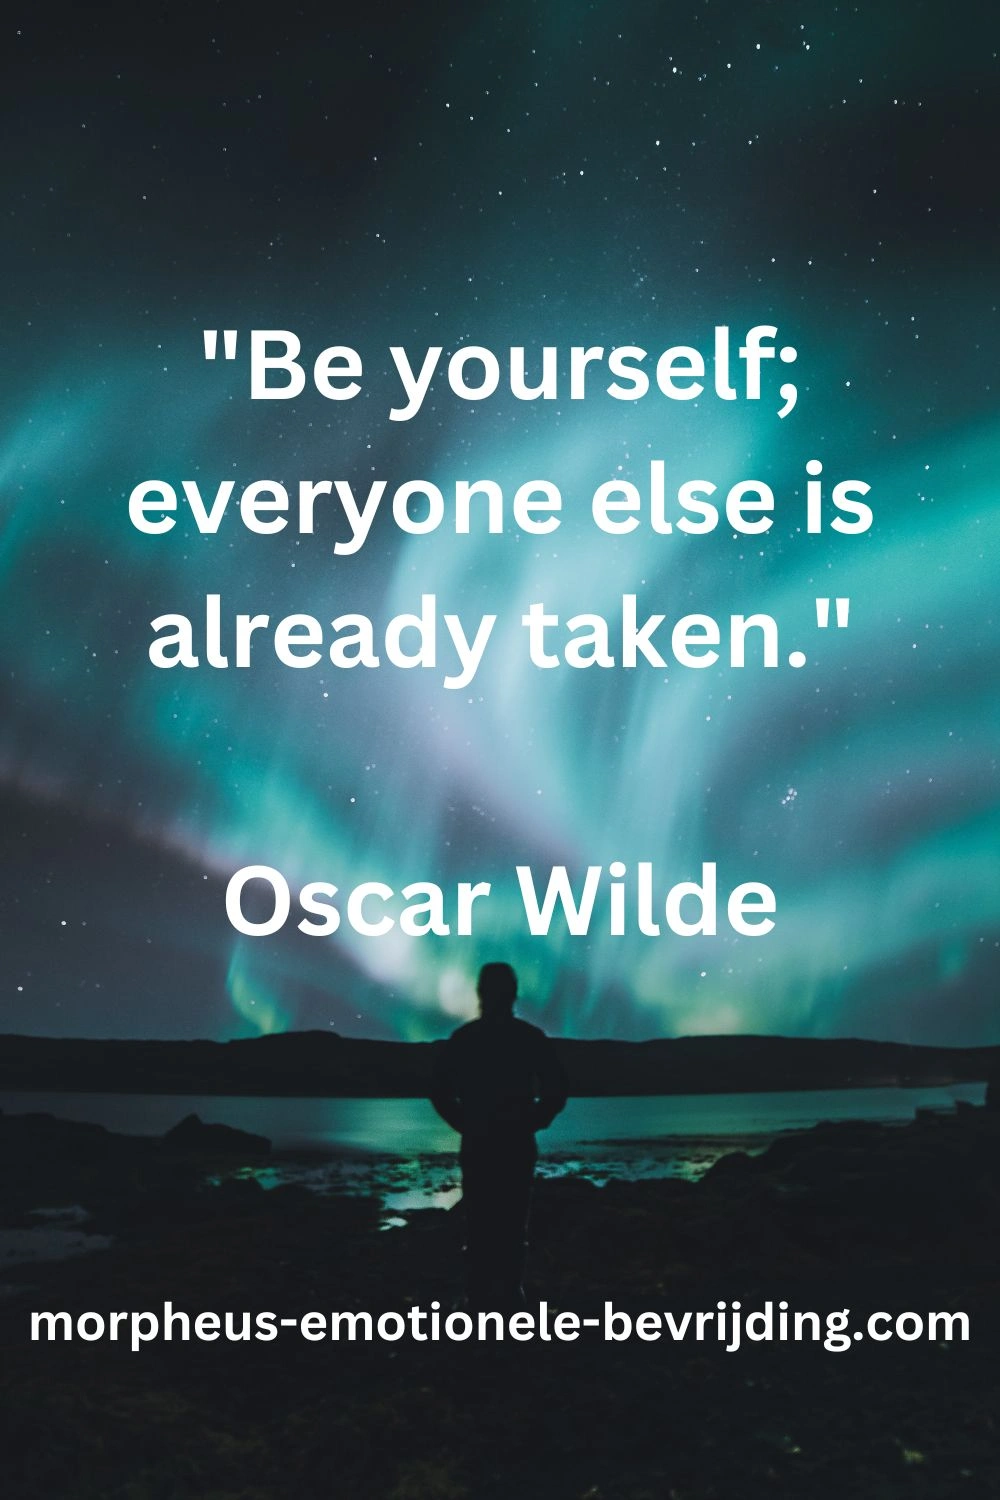 quotes over jezelf. Be yourself, every body is already taken. Oscar Wilde